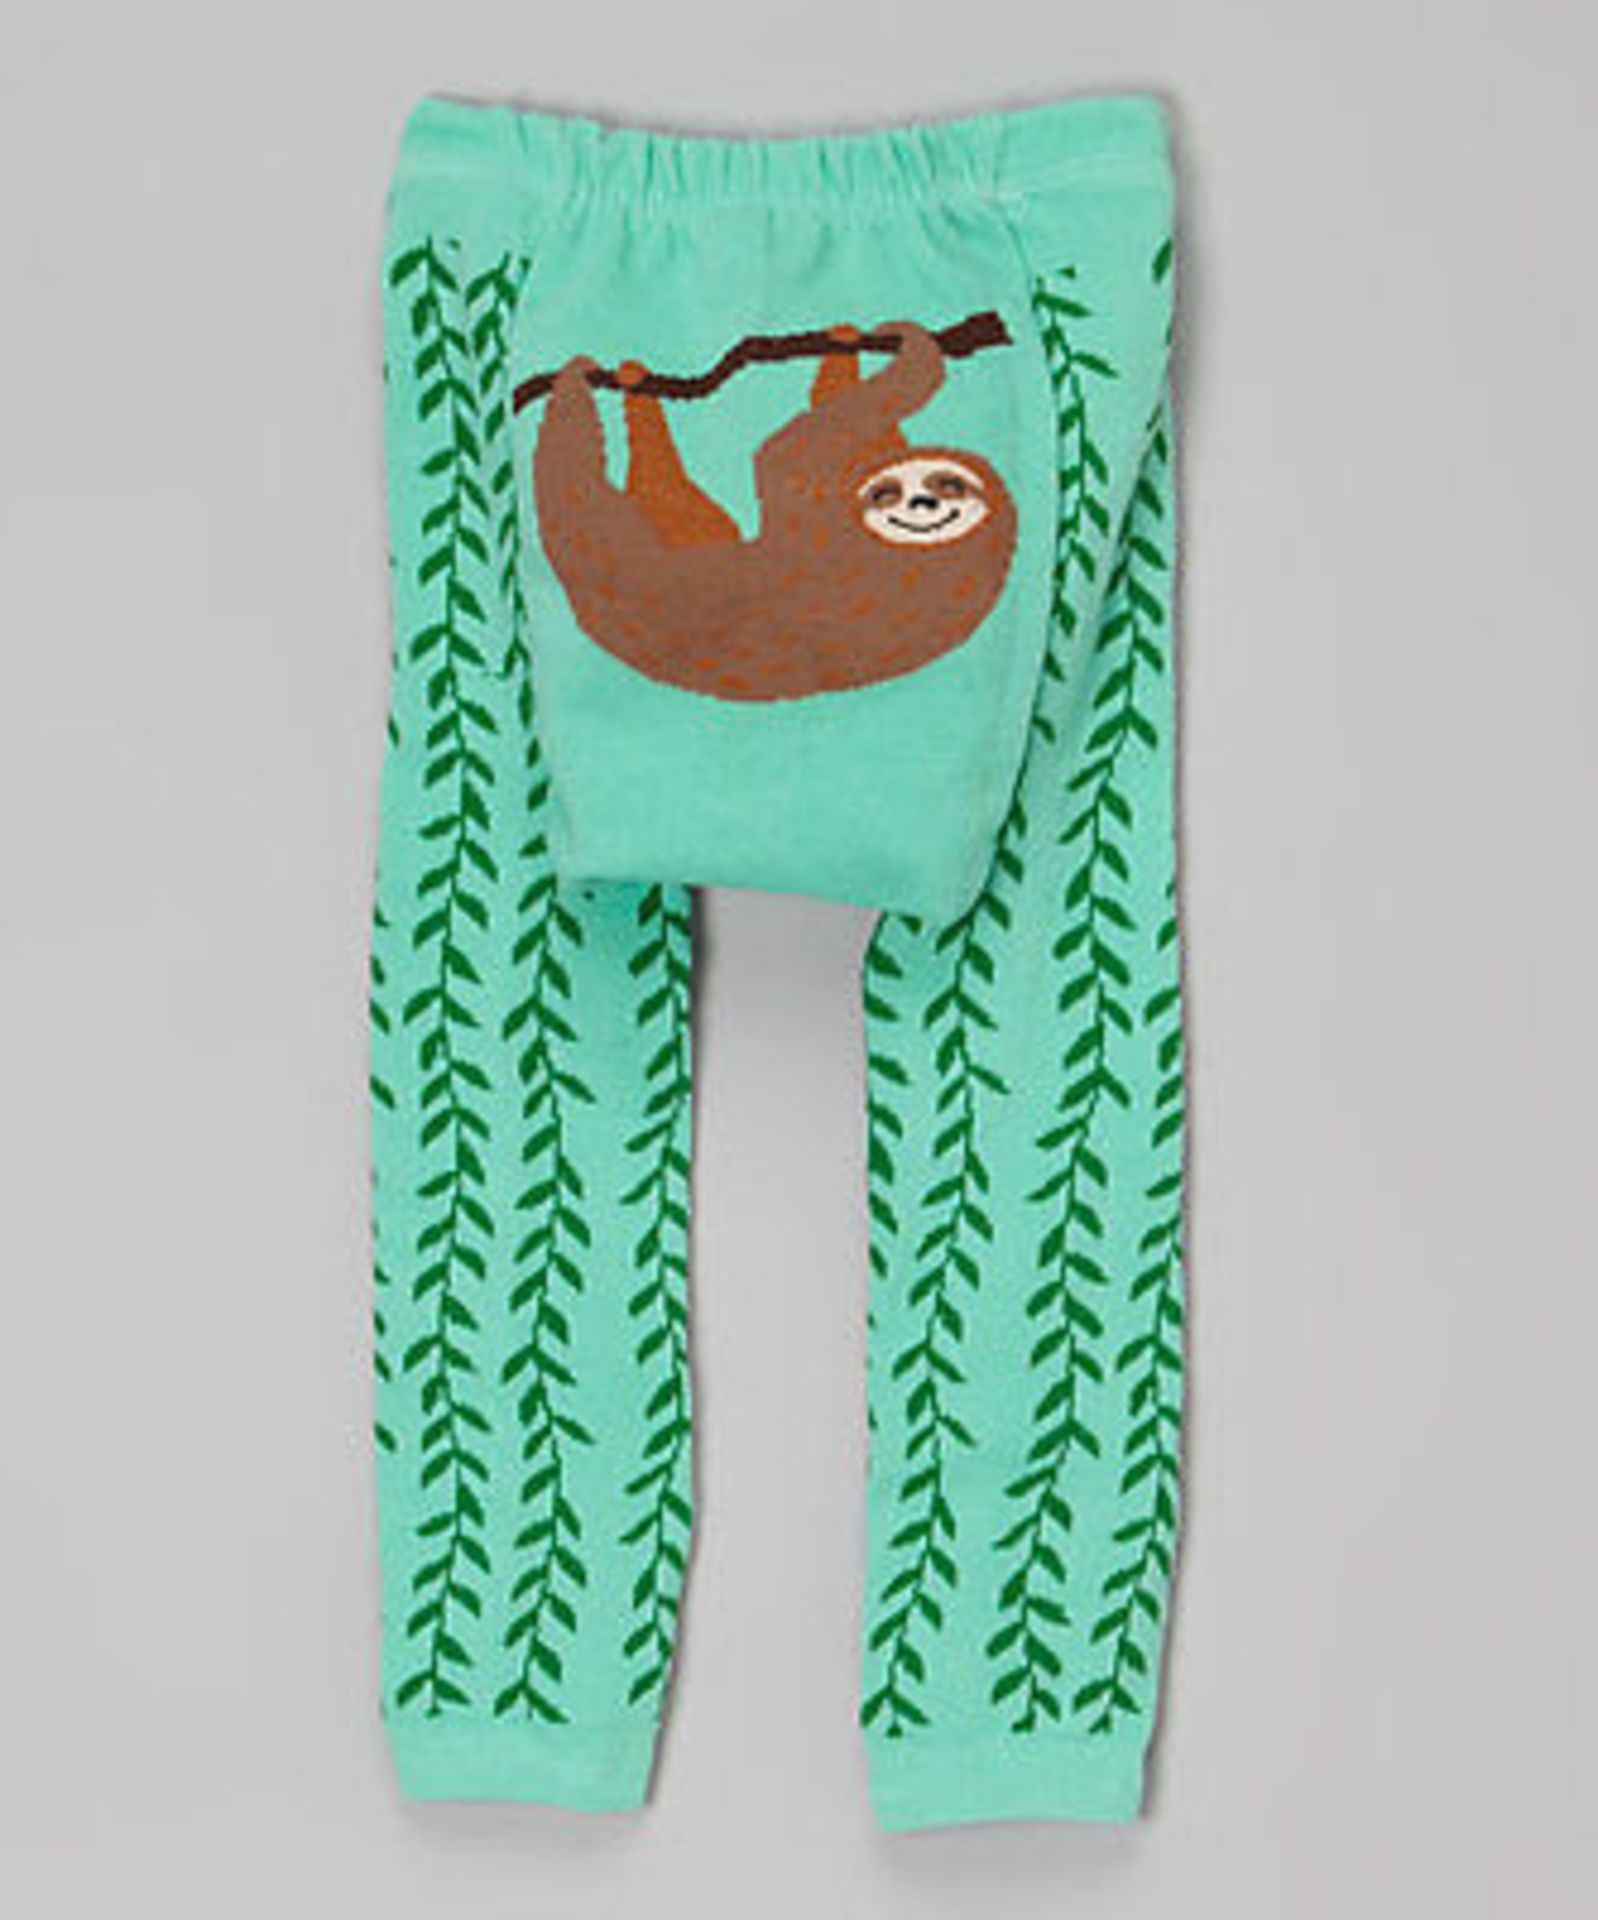 Doodle Pnats Green Sloth Leggings (18-24 Months) (New With Tags) [Ref: 265224731-] - Image 3 of 3